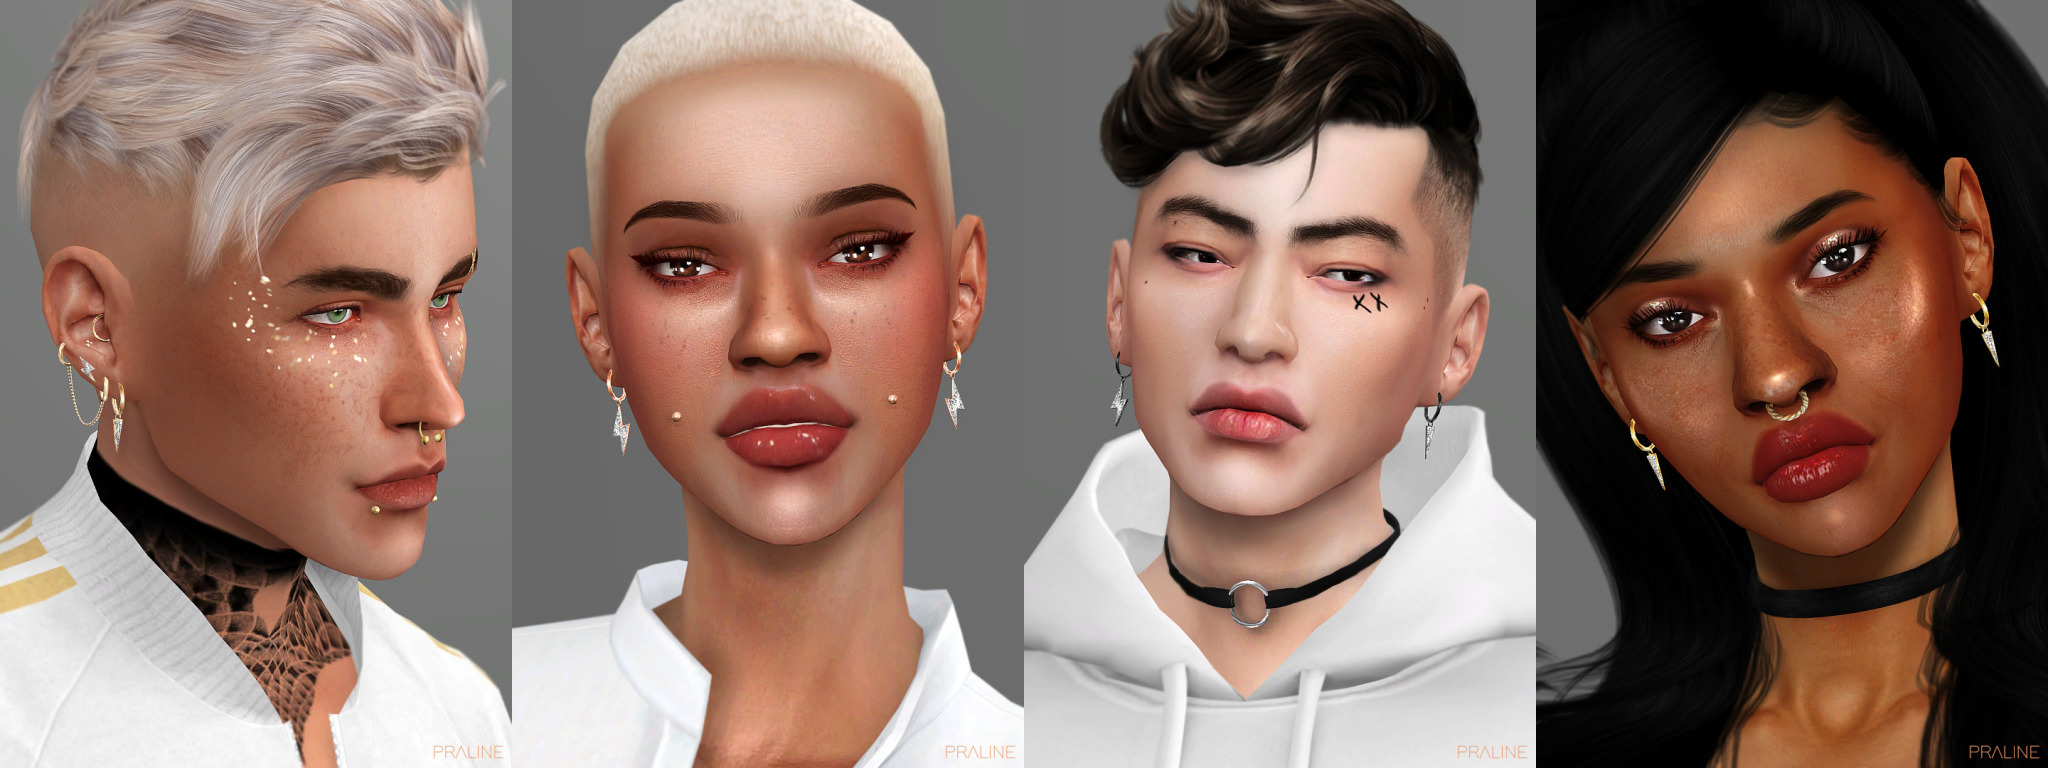 Install Thunder Ear Piercing Set - The Sims 4 Mods - CurseForge